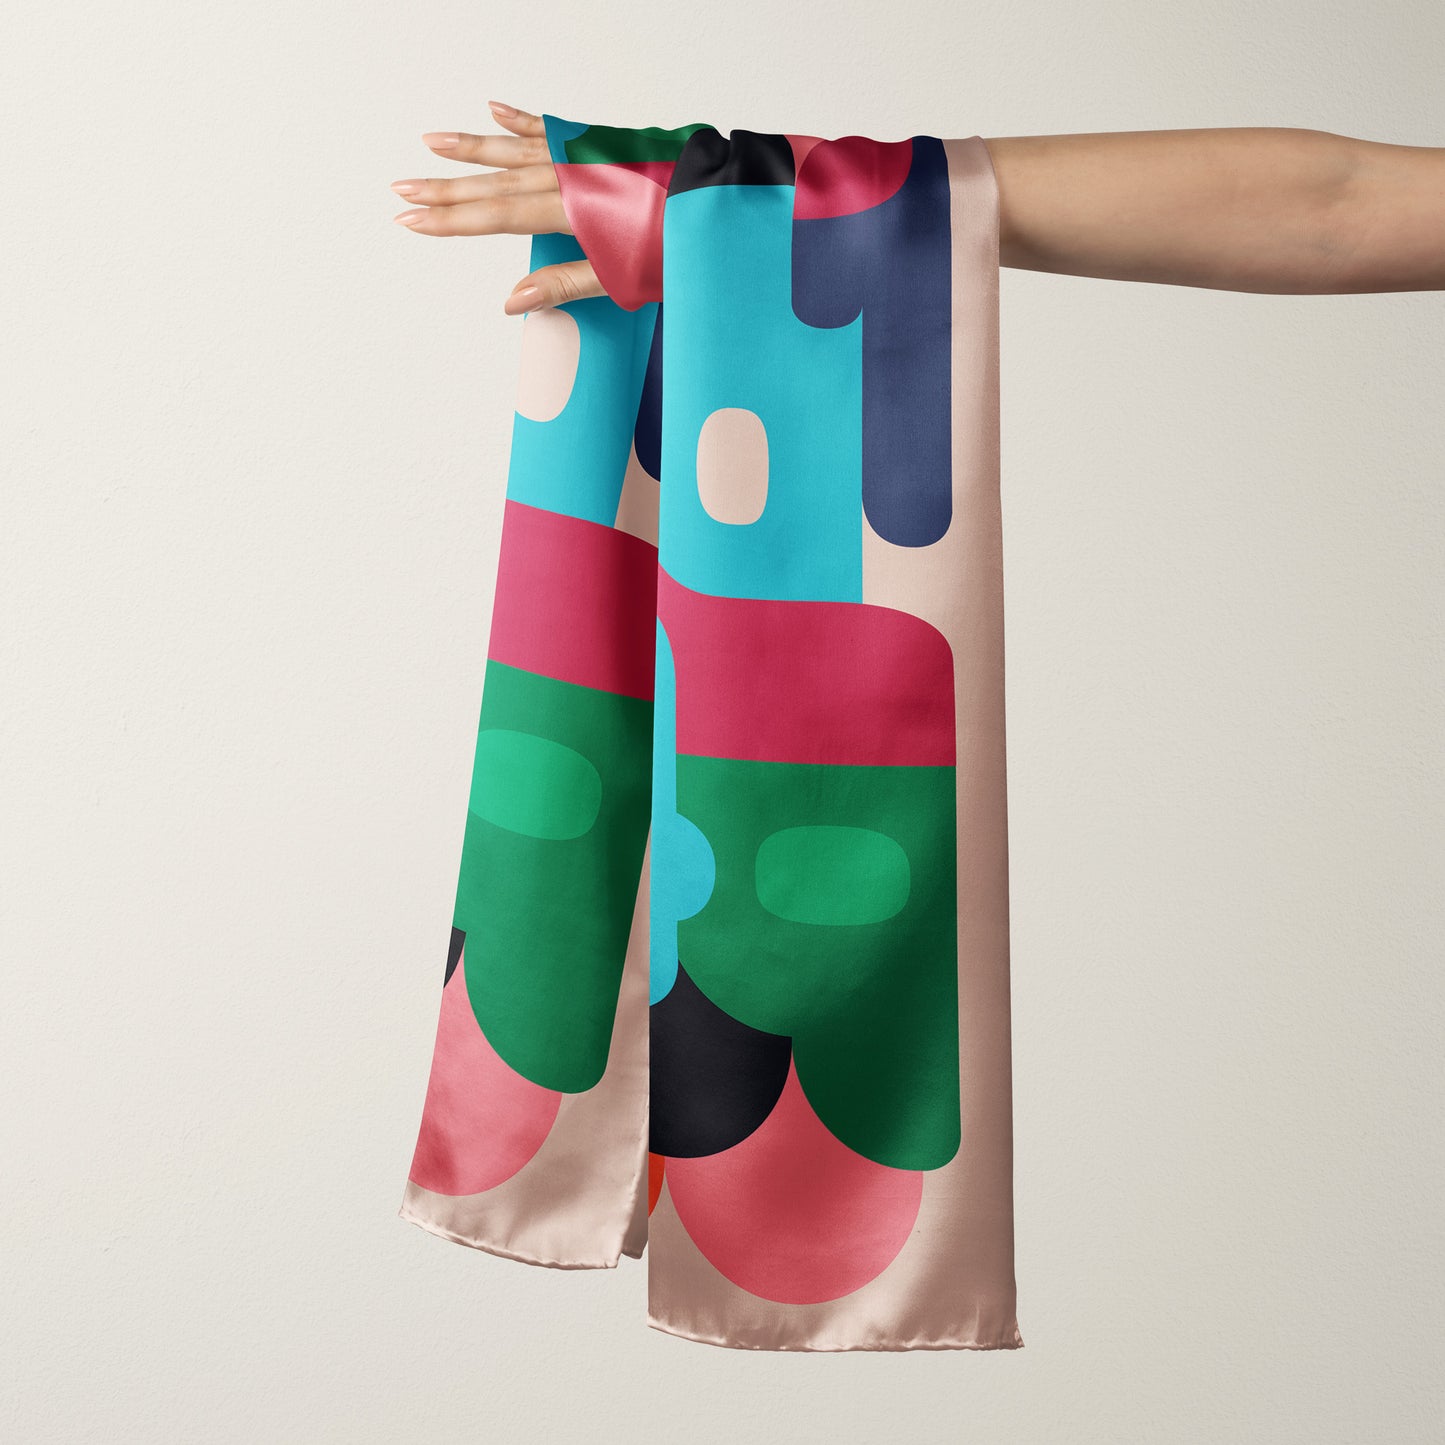 Designer retro silk scarf. Inspired by Art Deco with bold colors and shapes in greens, blues and pinks, this is a definite statement scarf. Wear it as a bandana or luxury head scarf